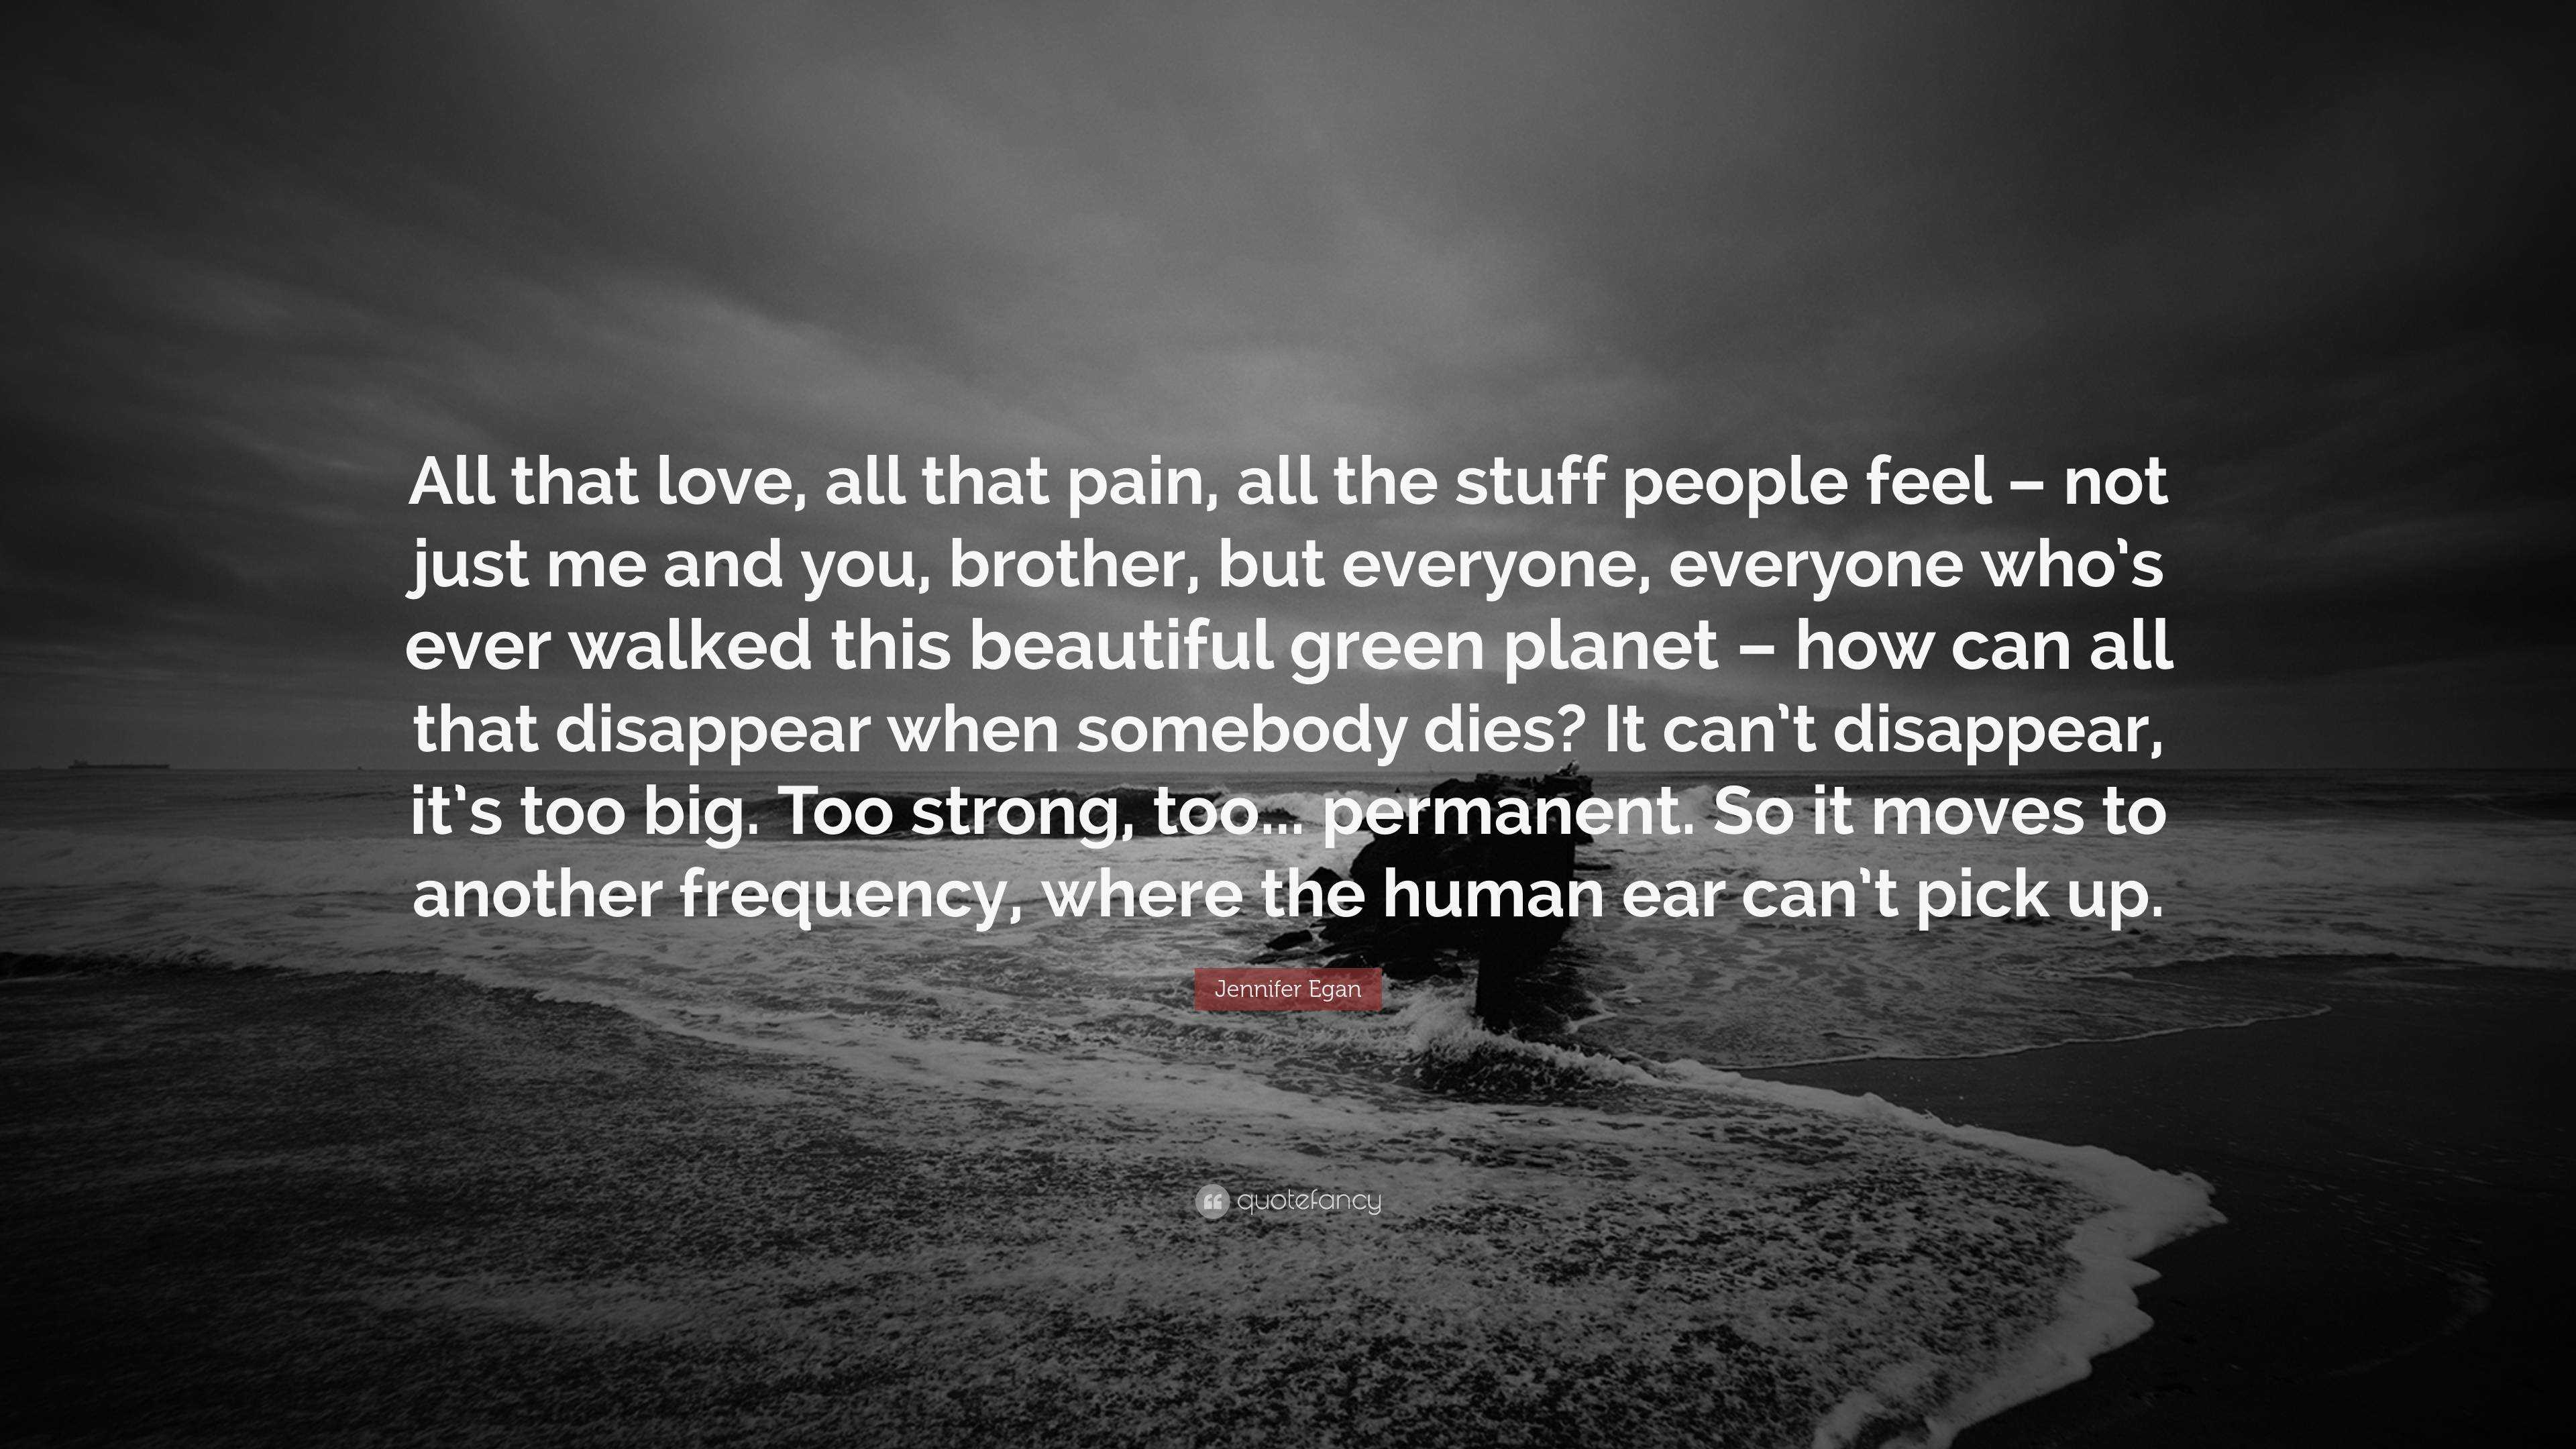 Jennifer Egan Quote: “All that love, all that pain, all the stuff ...